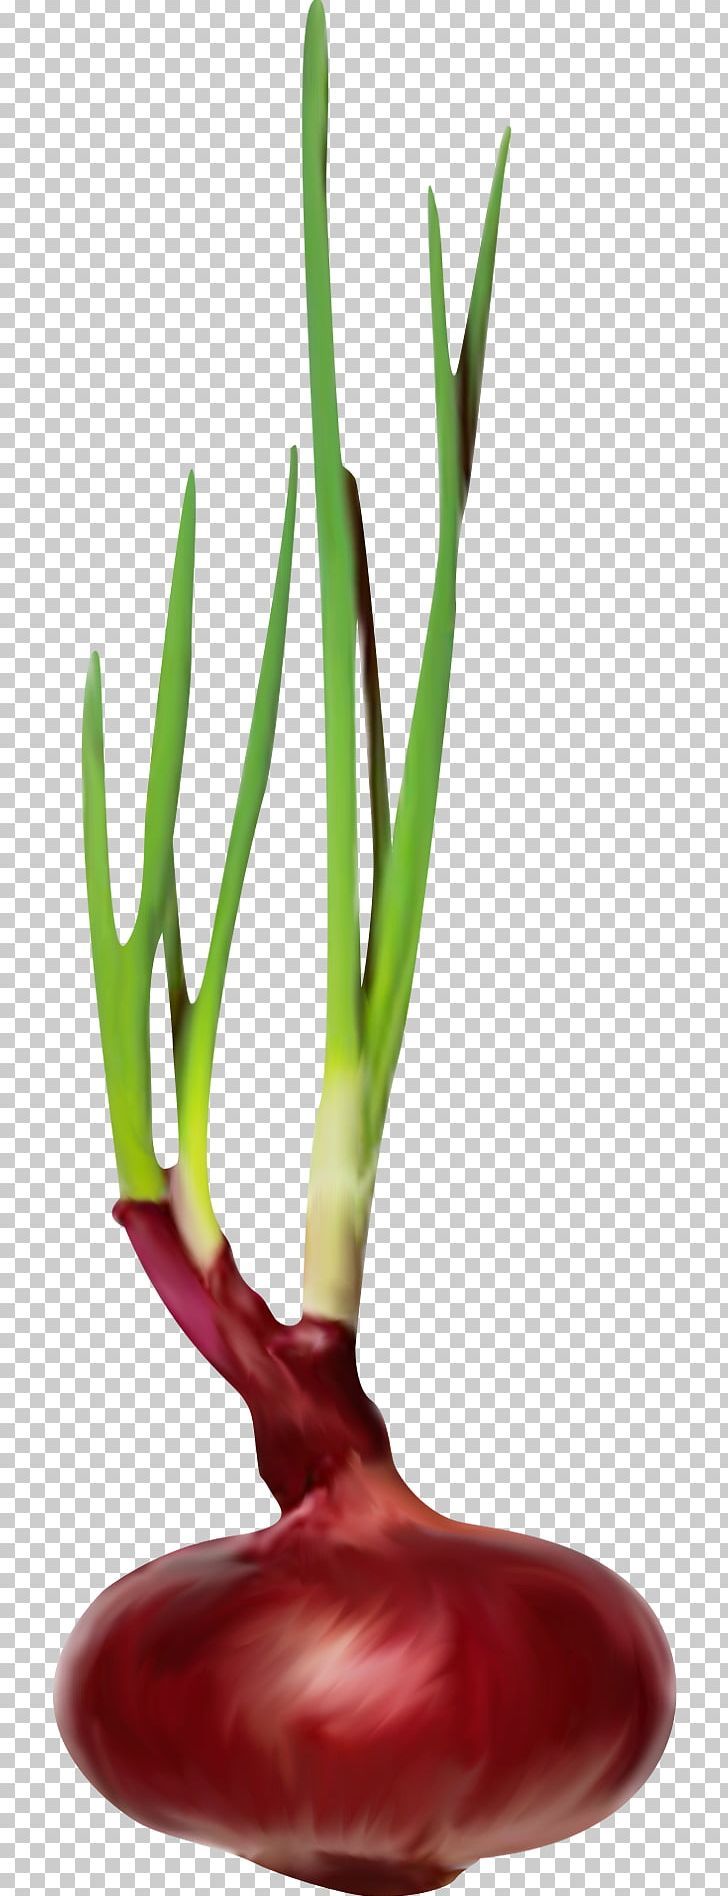 Onion Chili Pepper Scallion PNG, Clipart, Allium, Bell Peppers And Chili Peppers, Cayenne Pepper, Chili Pepper, Closeup Free PNG Download